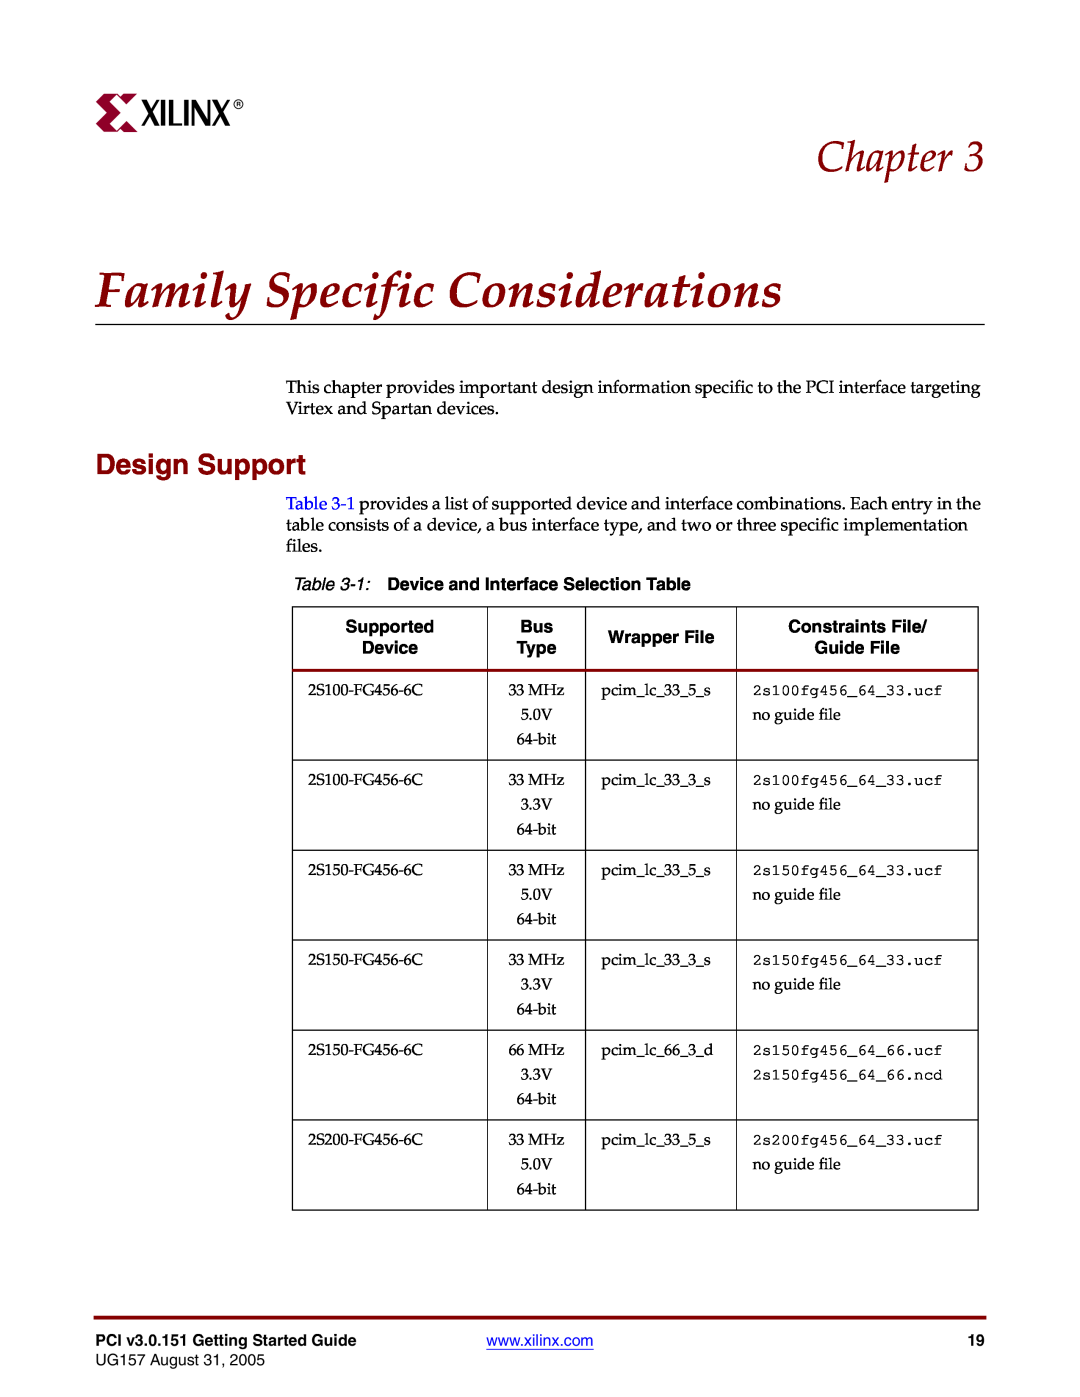 Xilinx PCI v3.0 Family Specific Considerations, Design Support, 1 Device and Interface Selection Table, Supported, Chapter 